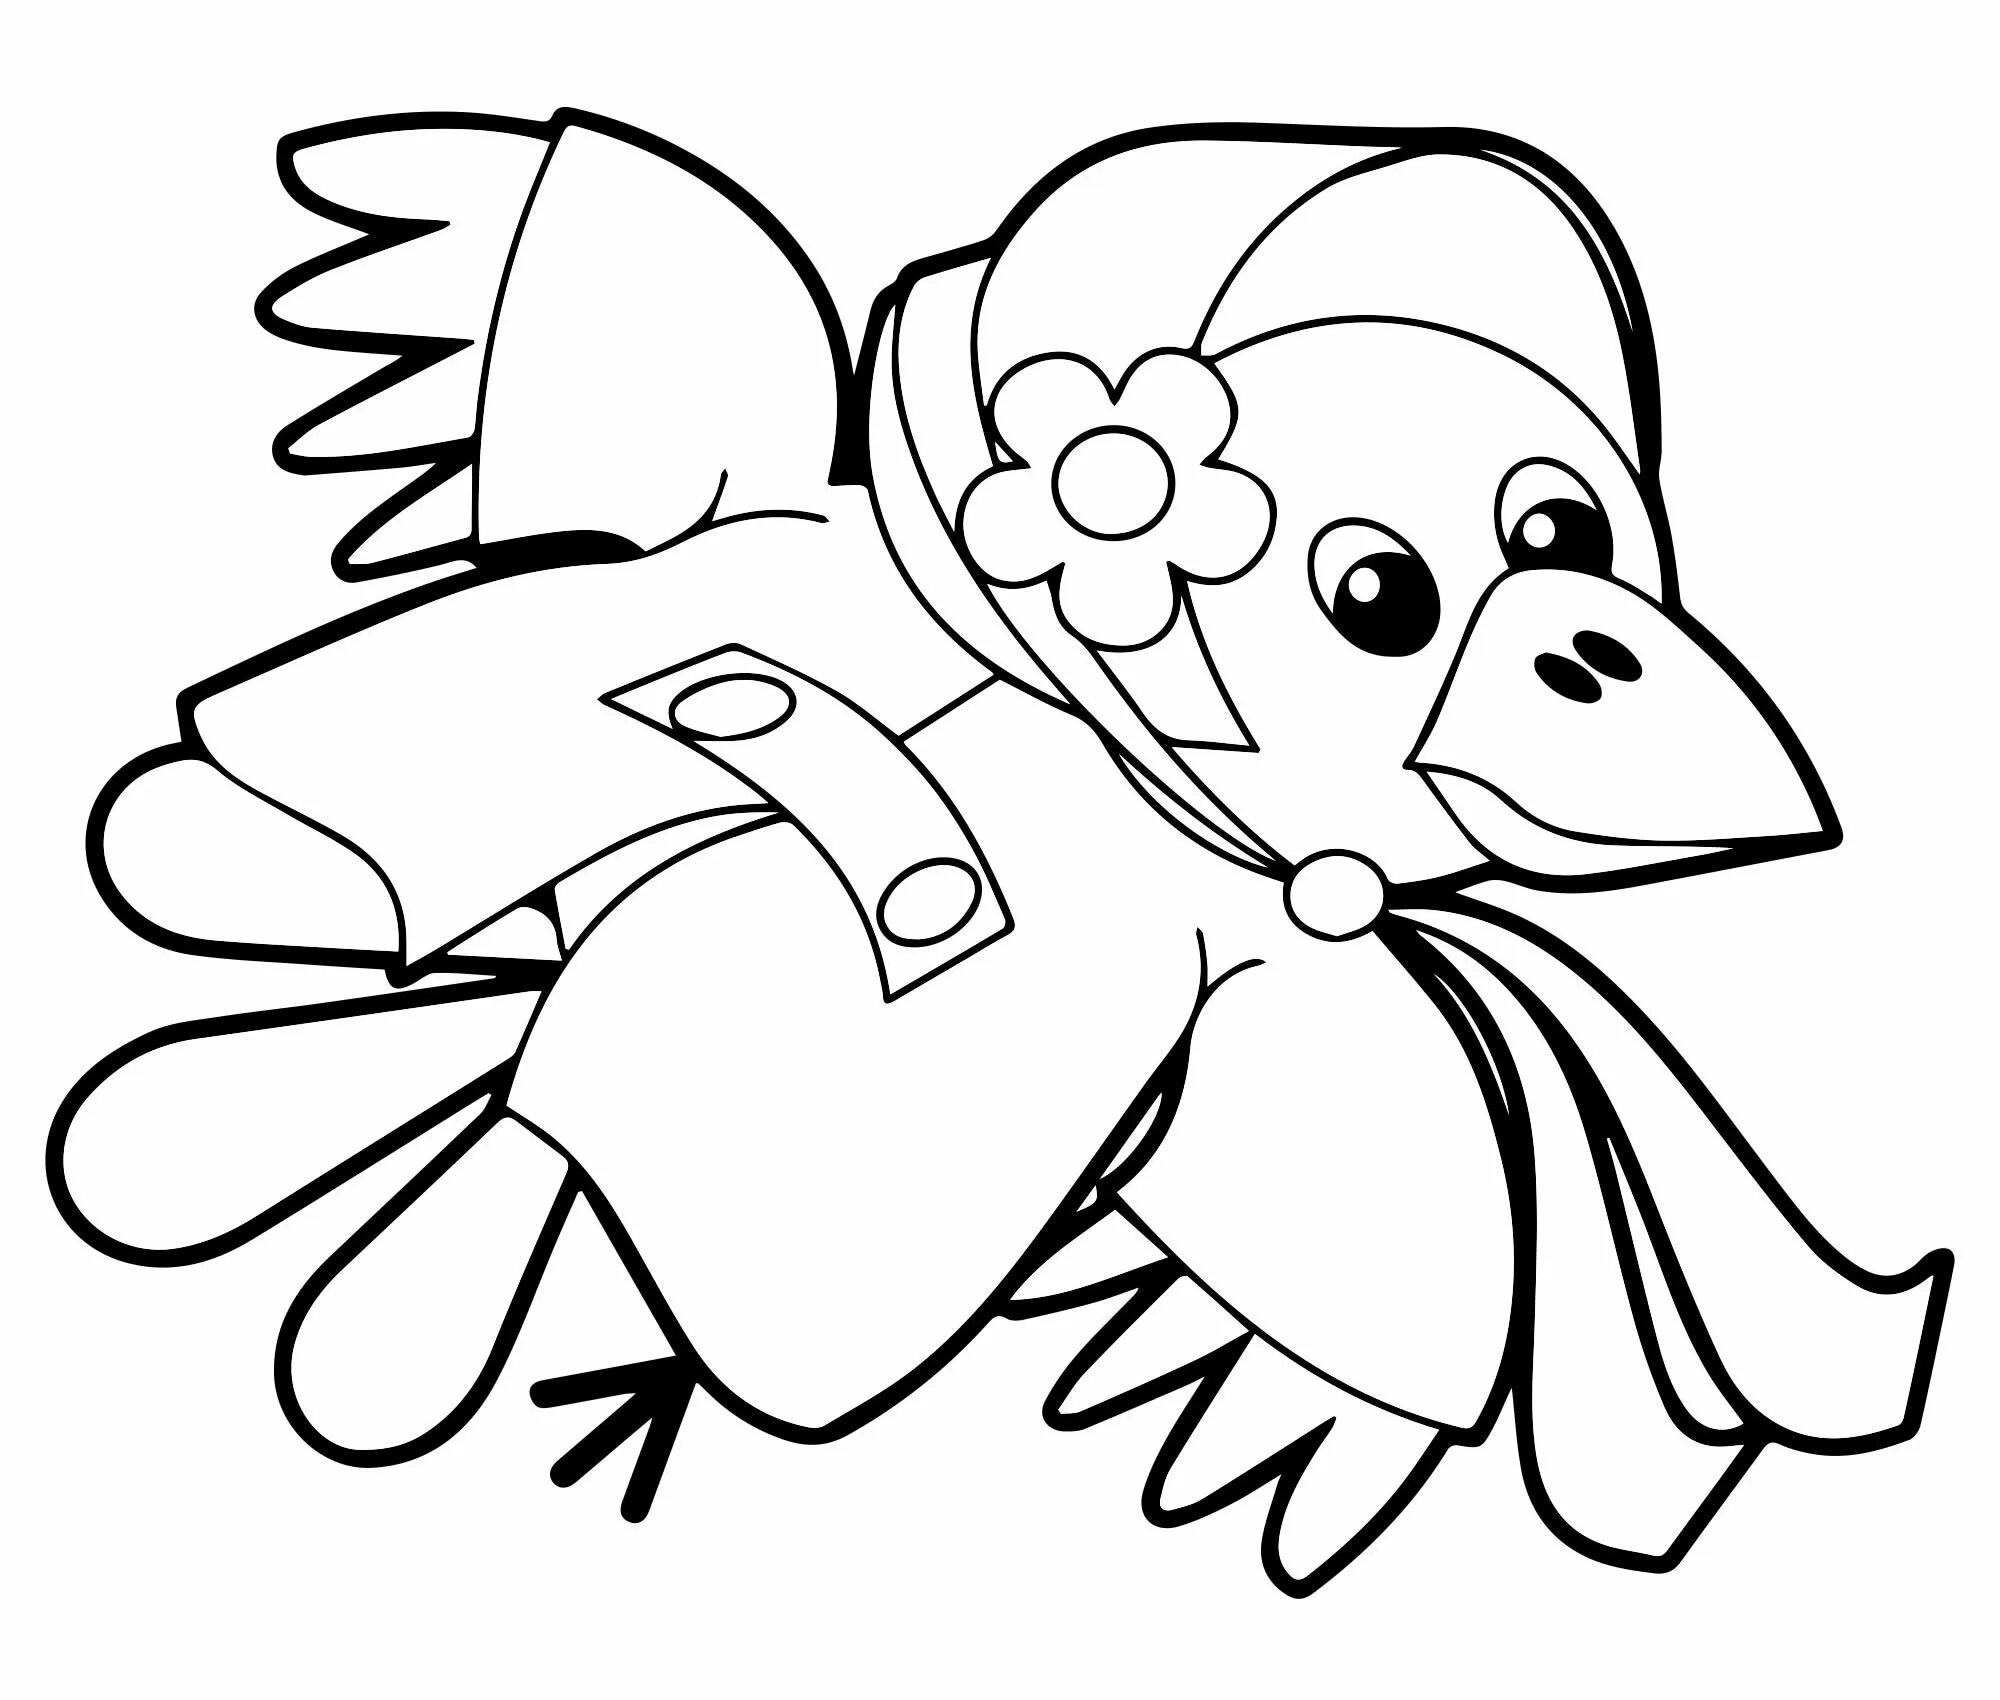 Brilliant bird coloring page for kids